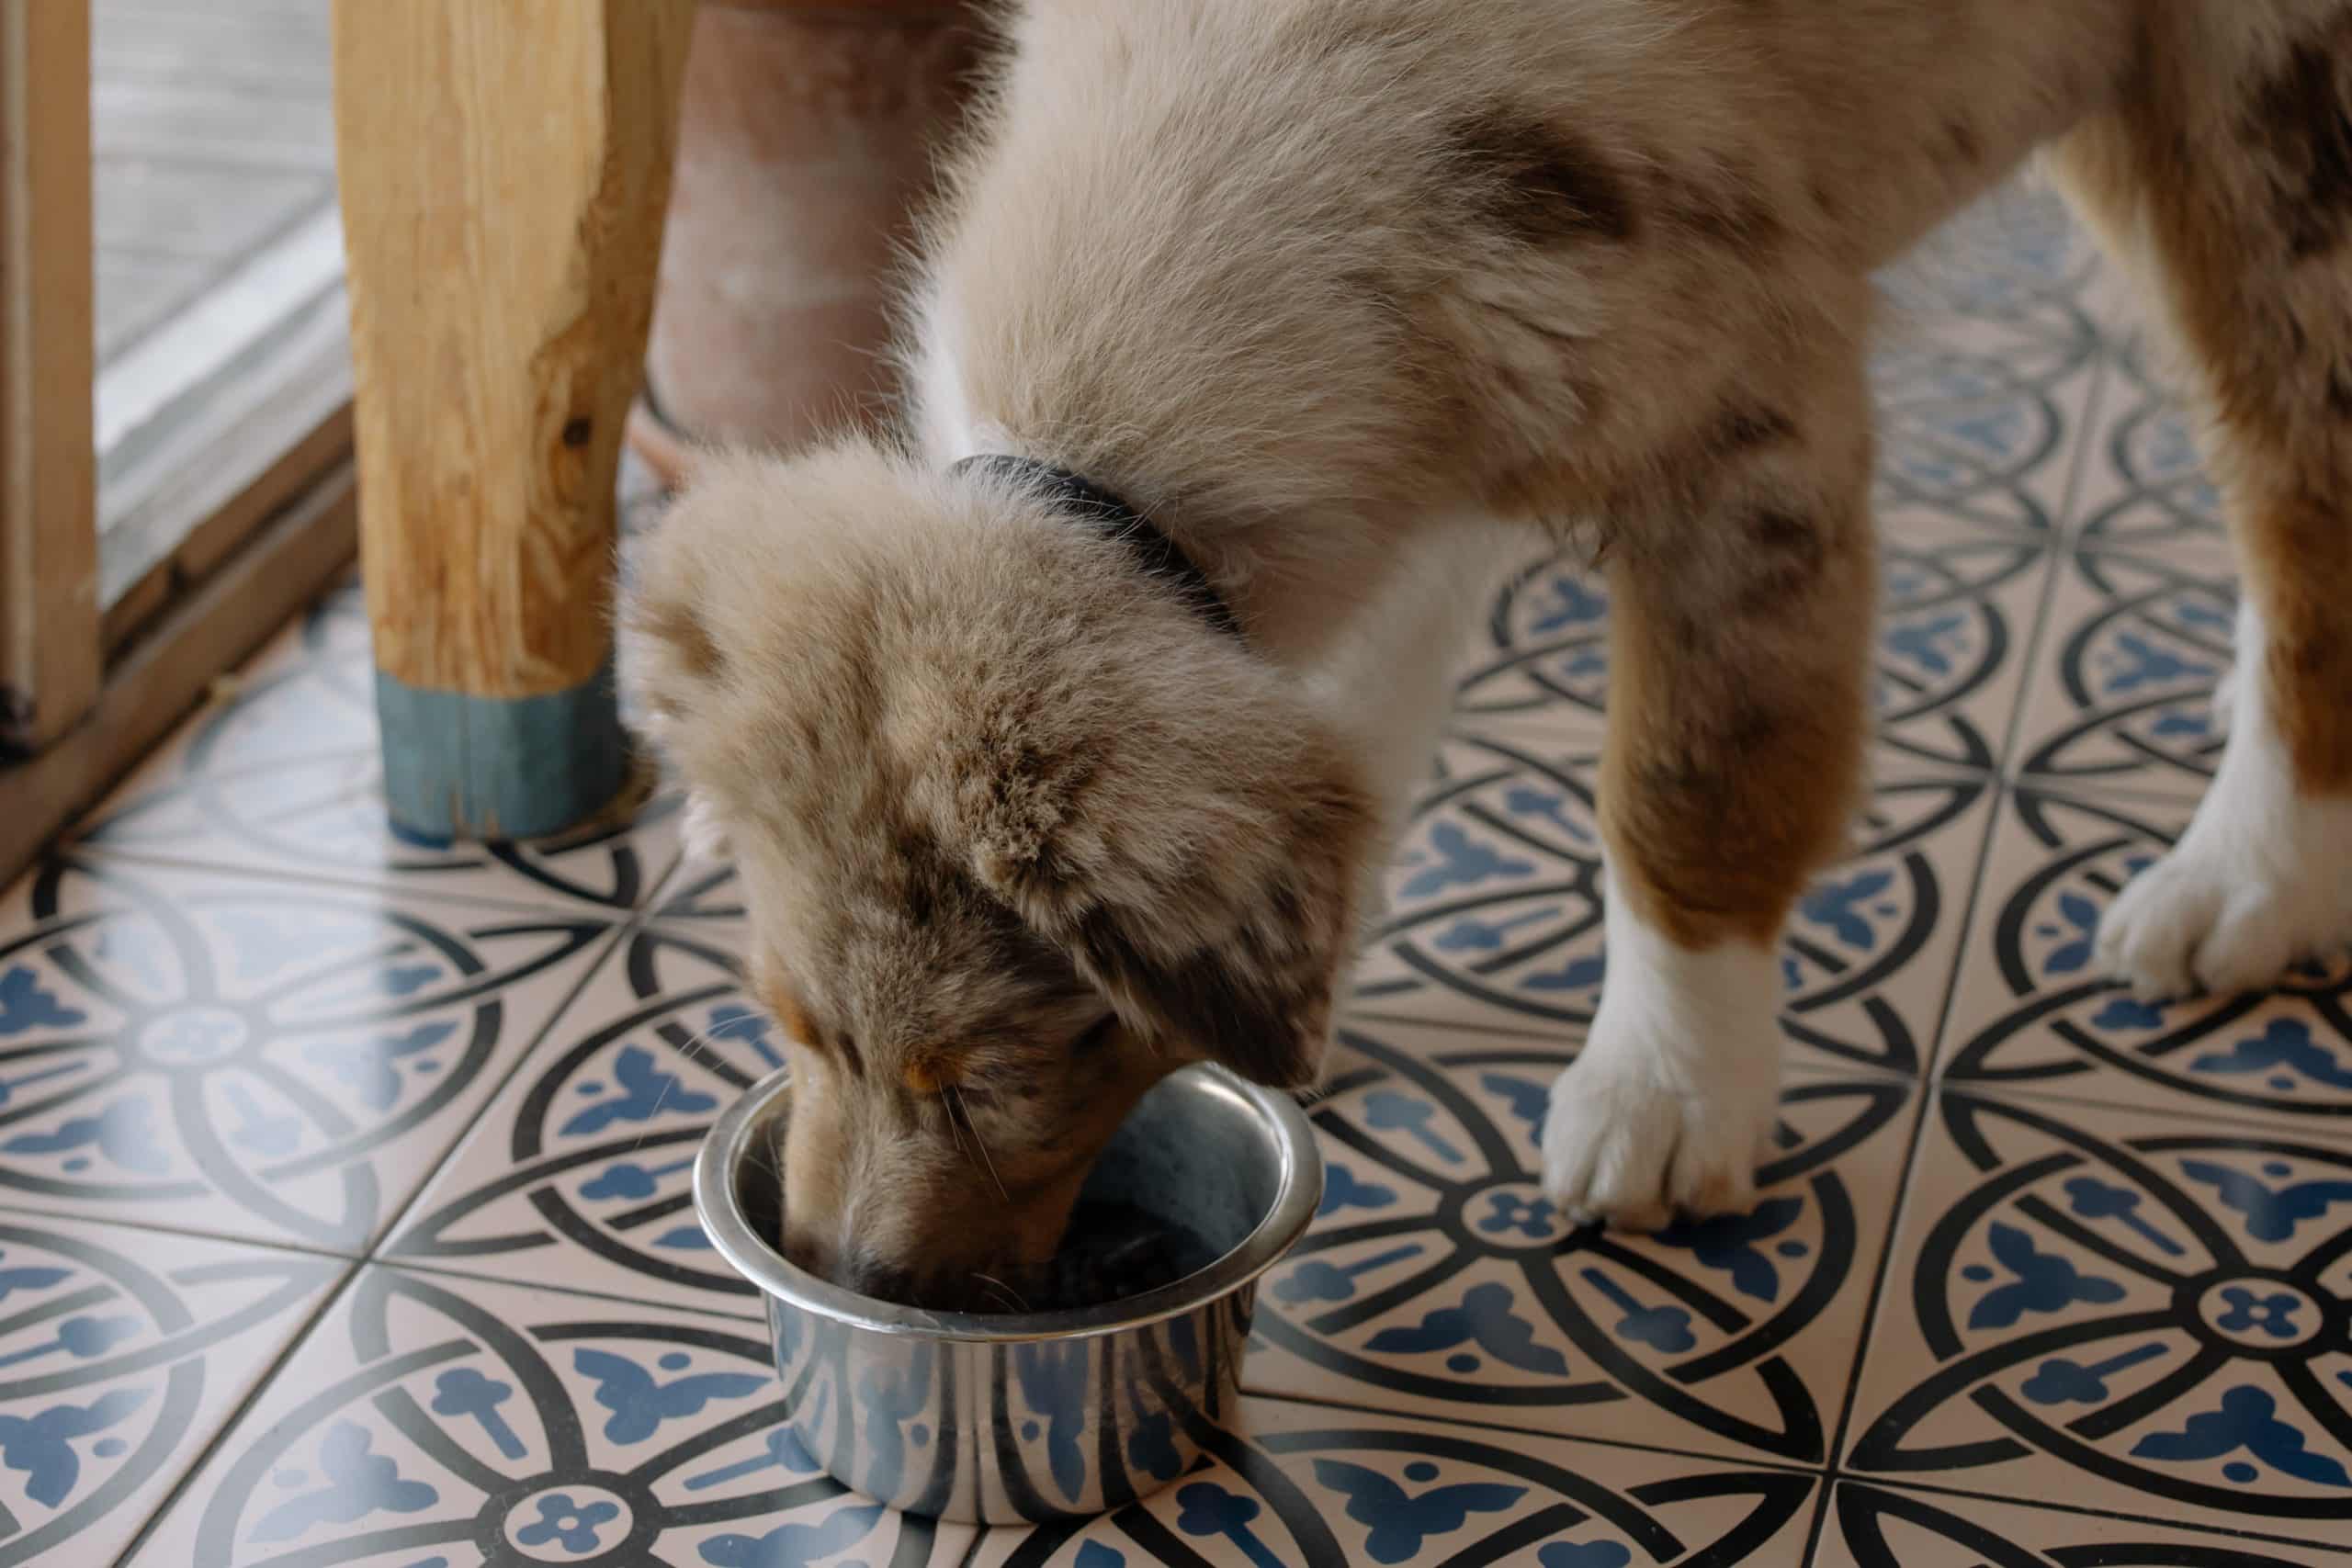 Puppy eating from food bowl.